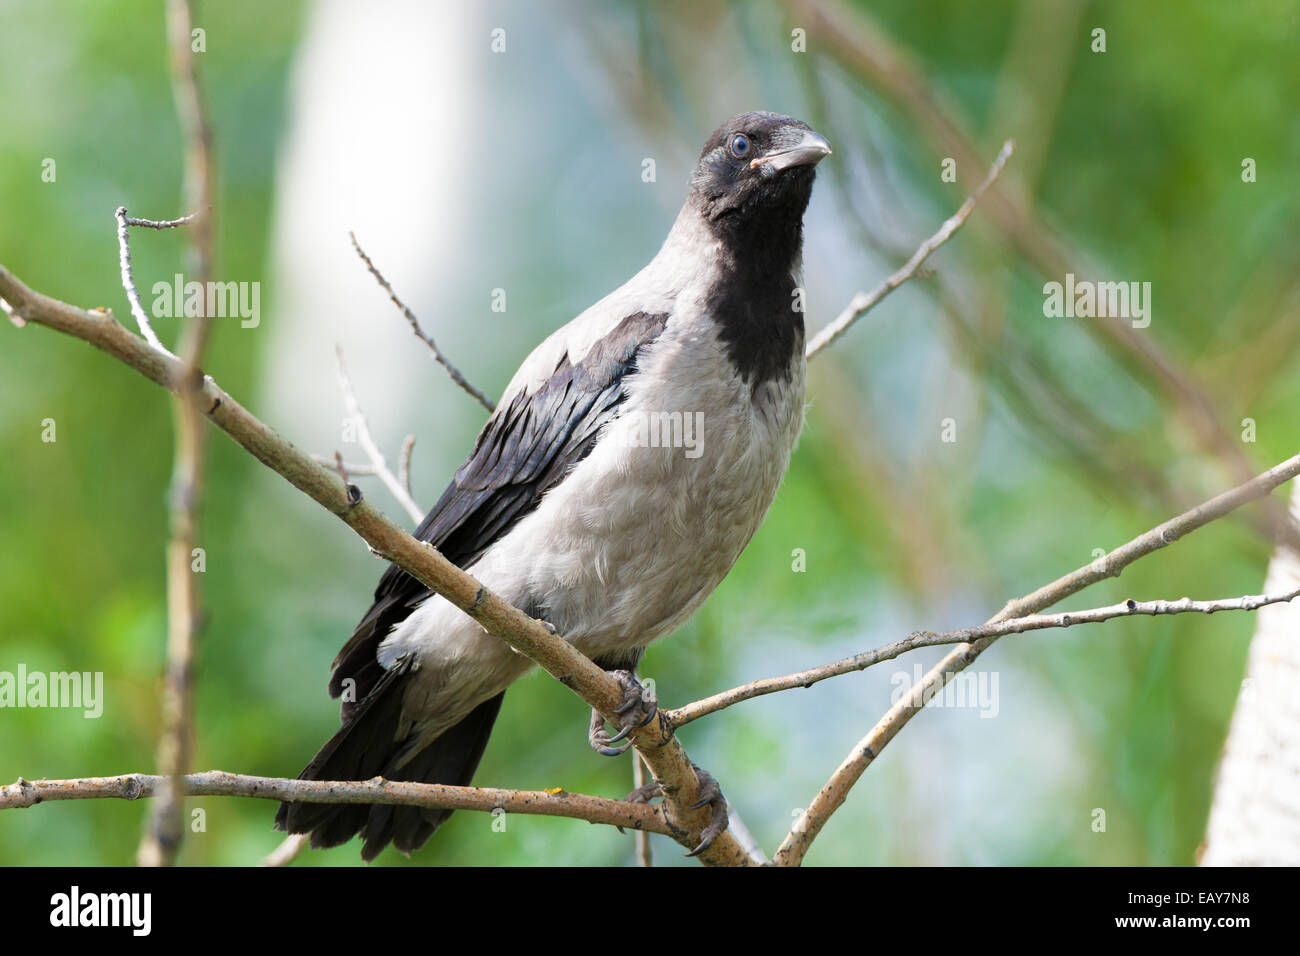 Corvus cornix, Hooded Crow is in the nature. Stock Photo